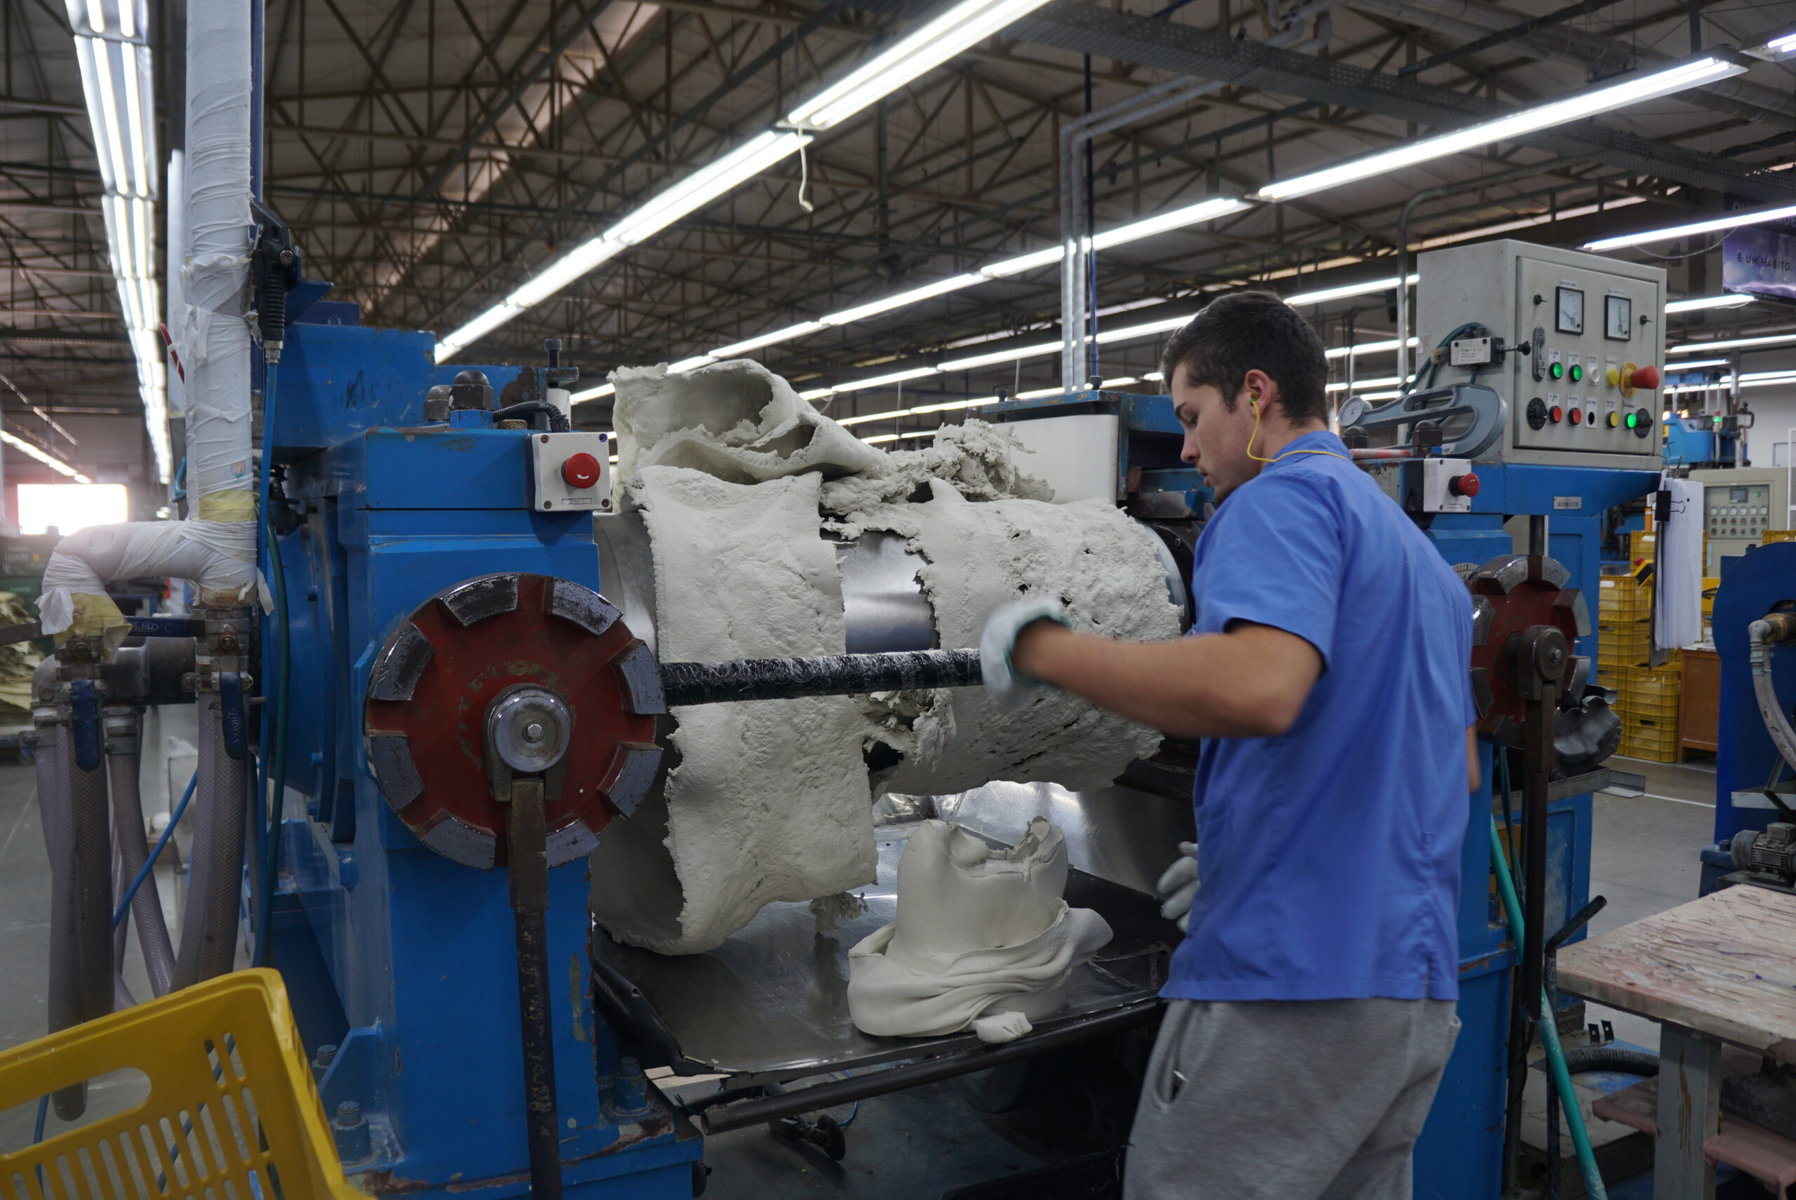 A worker at the Veja factory